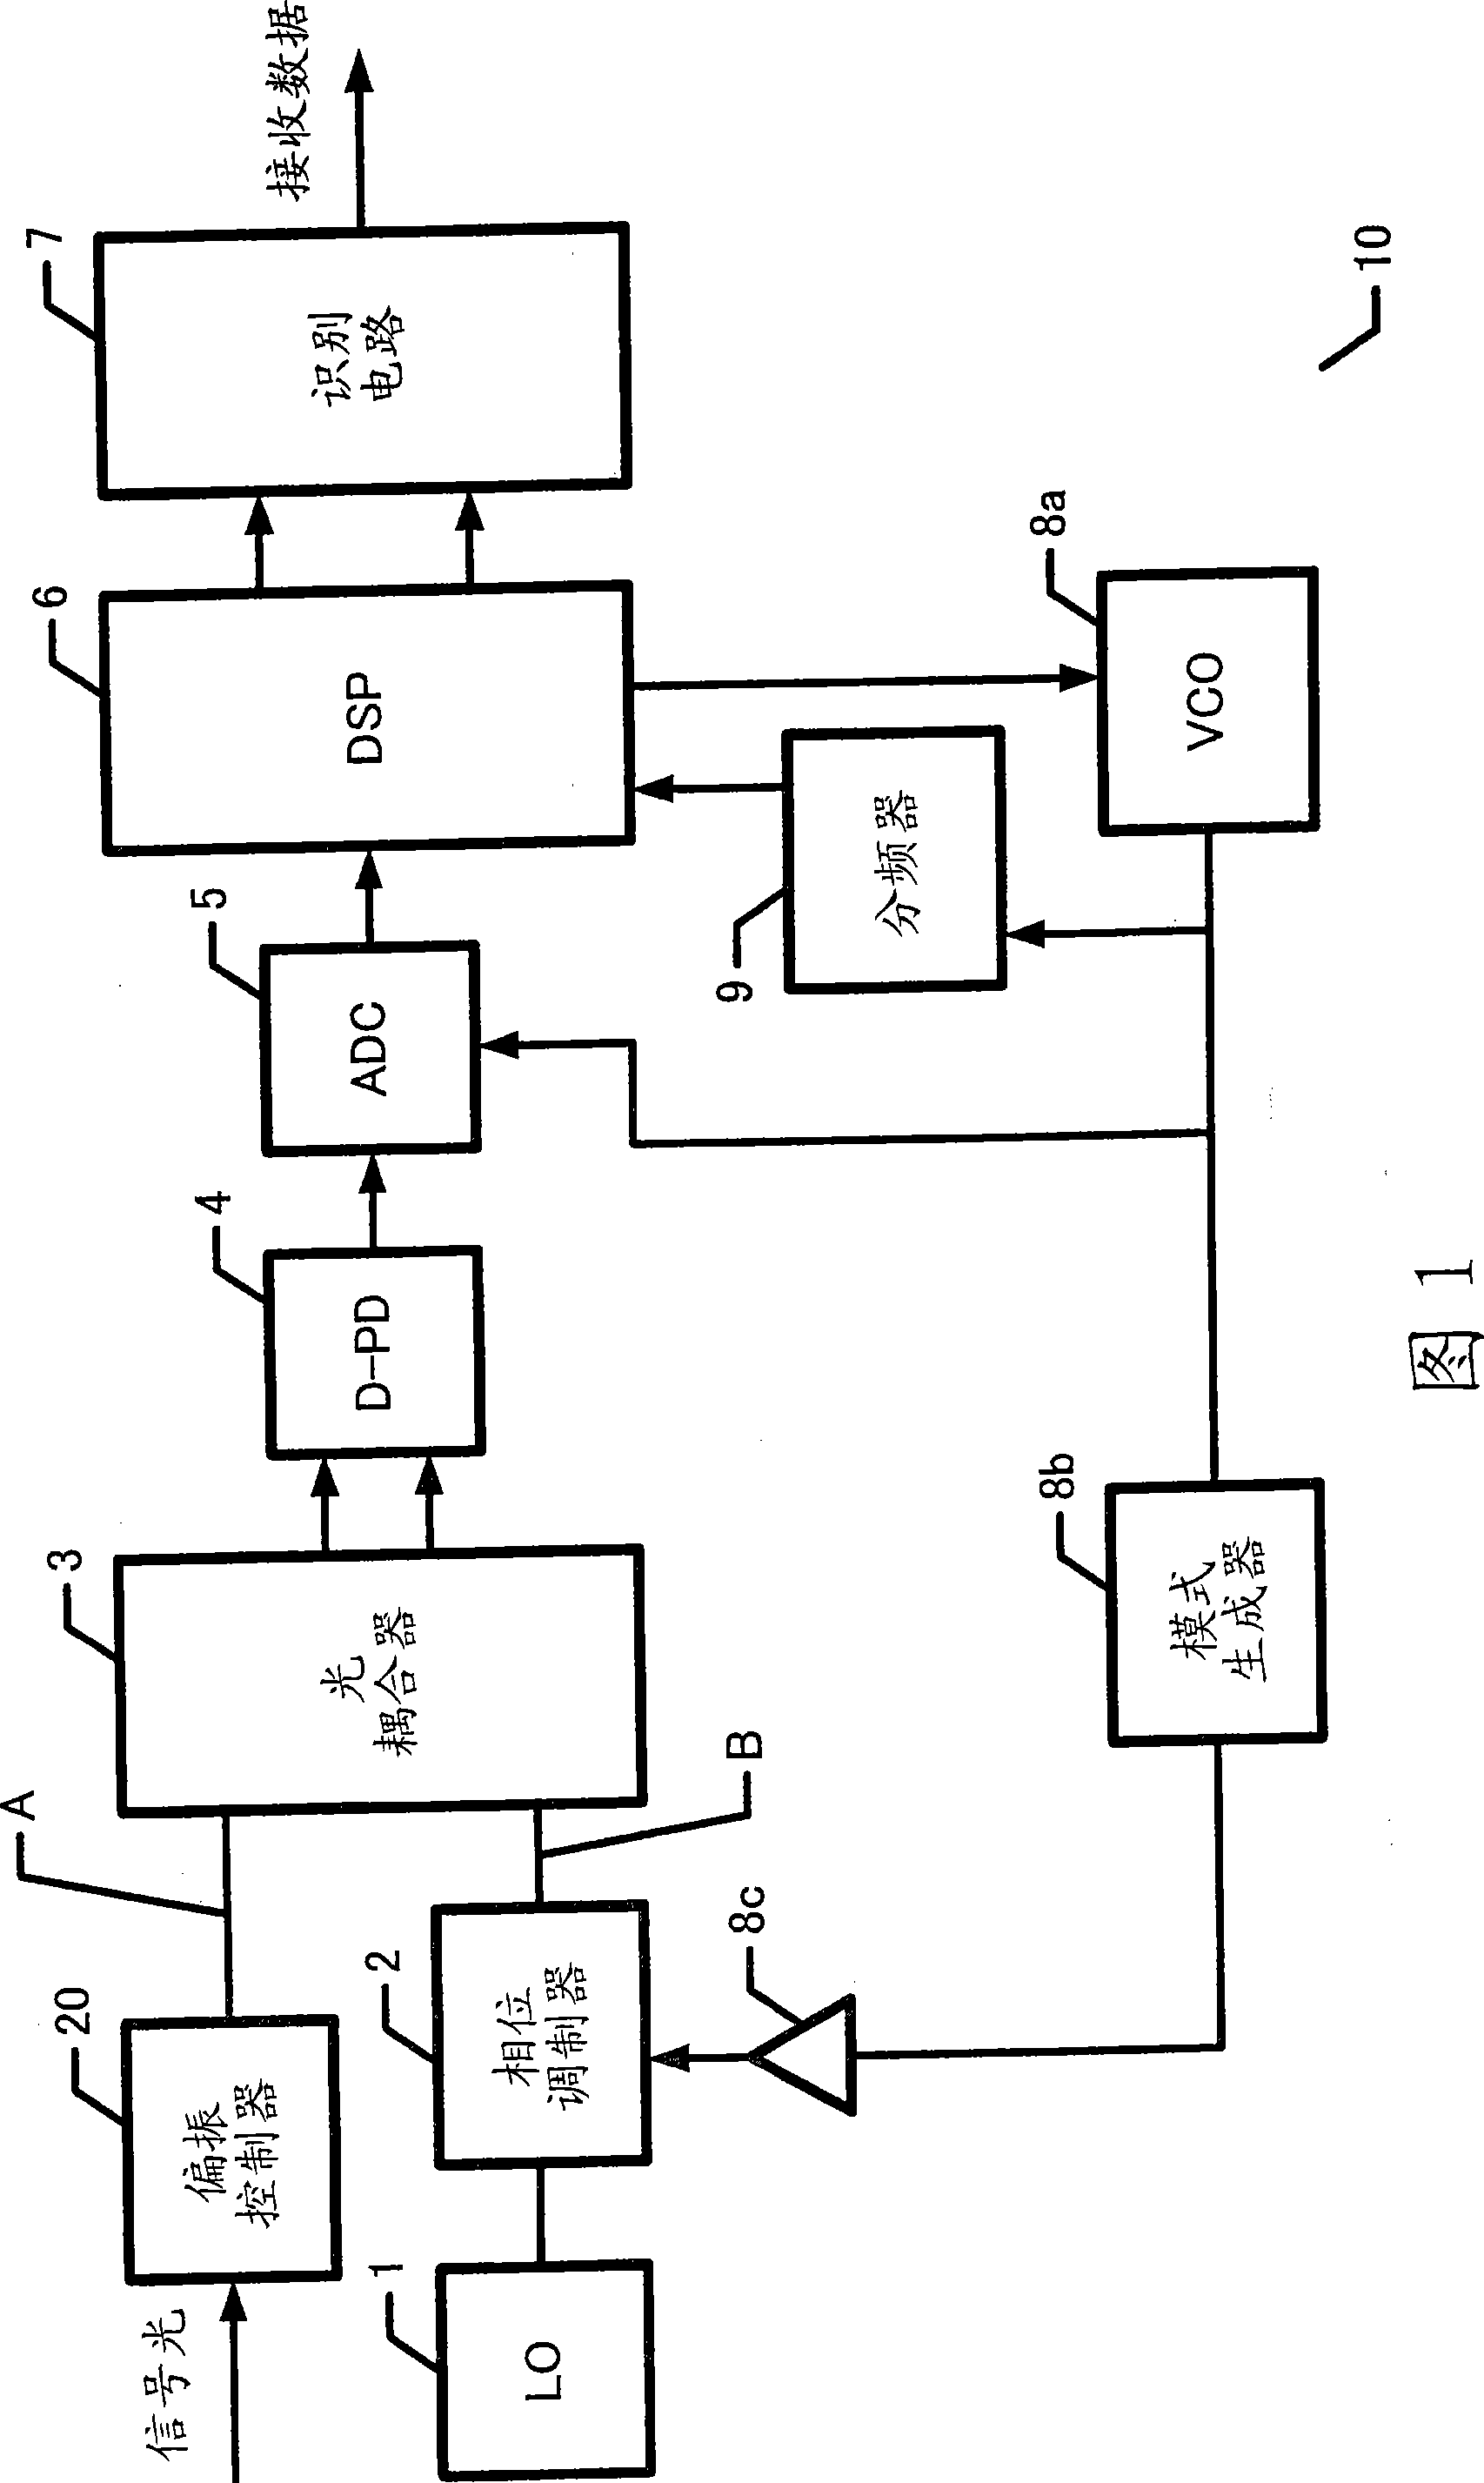 Coherent light receiving system